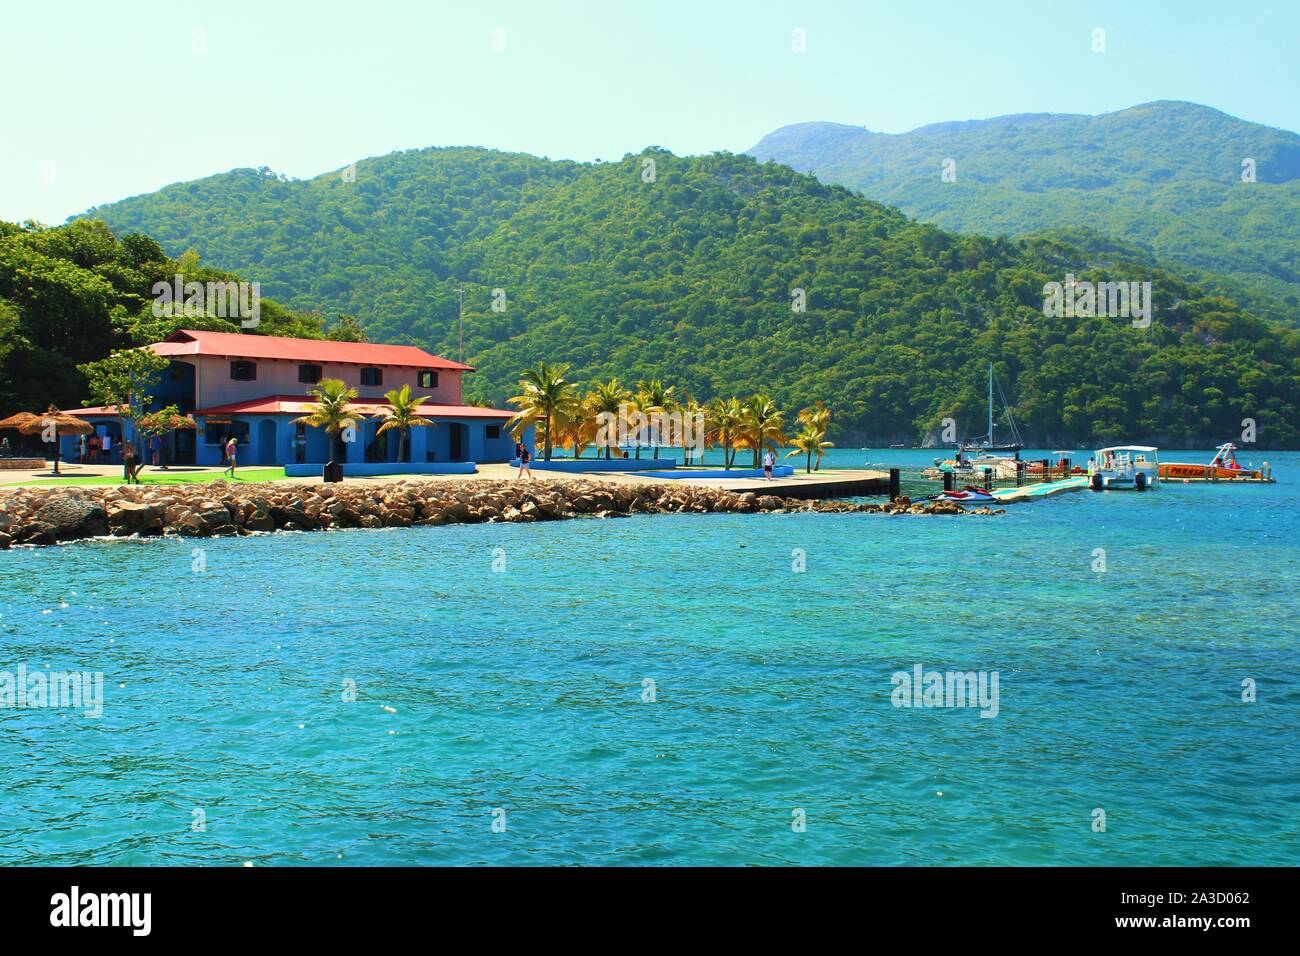 A section of the resort of Labadee, Haiti, which is privately owned by Royal Caribbean International for the exclusive use of its cruise ships. Stock Photo